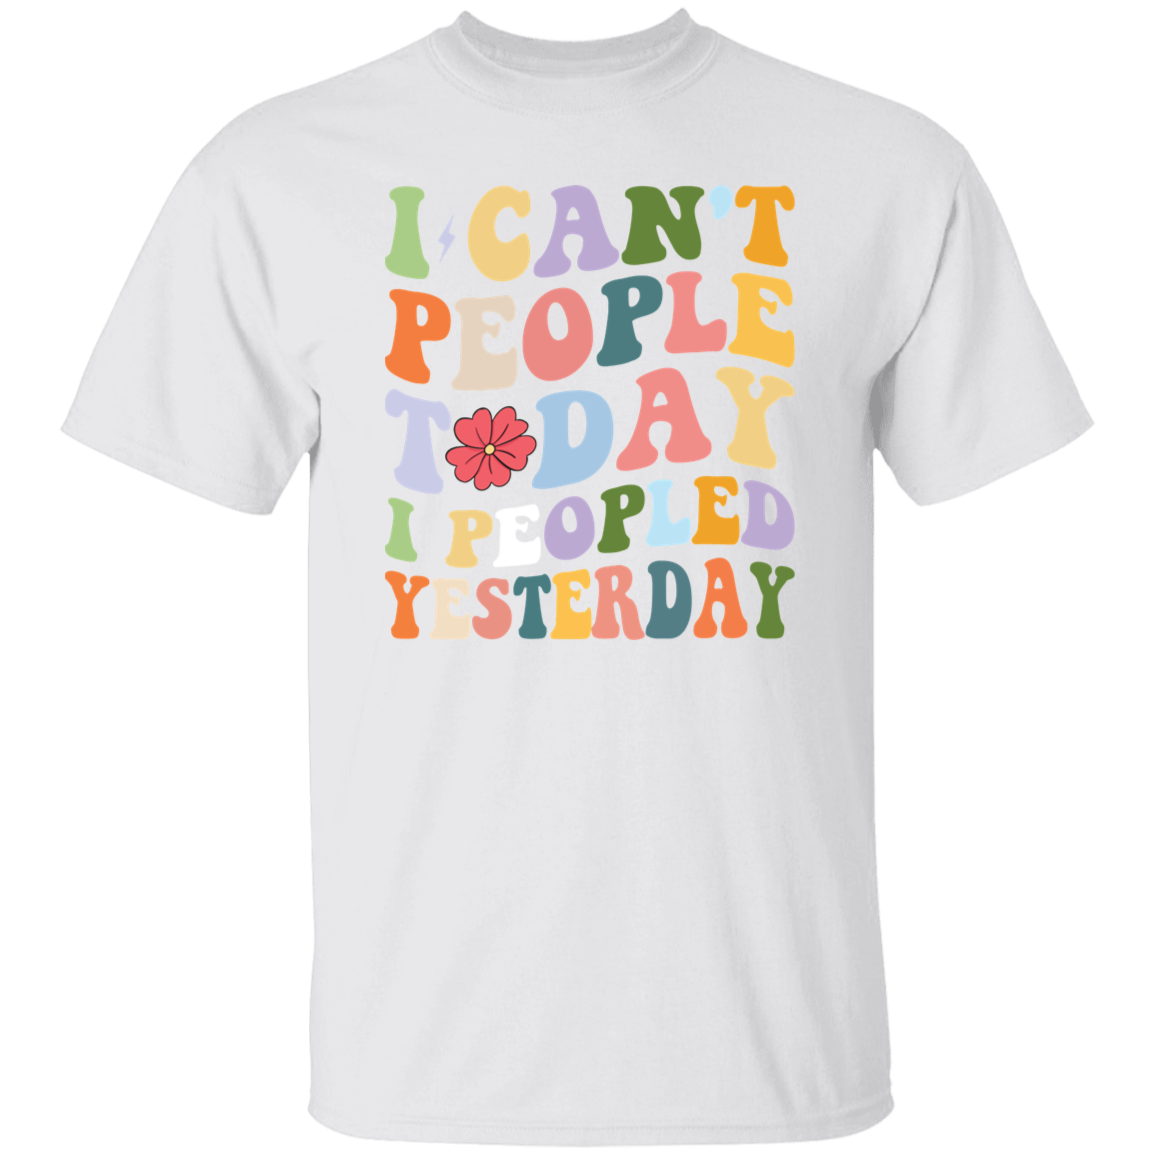 Can't People T-Shirt